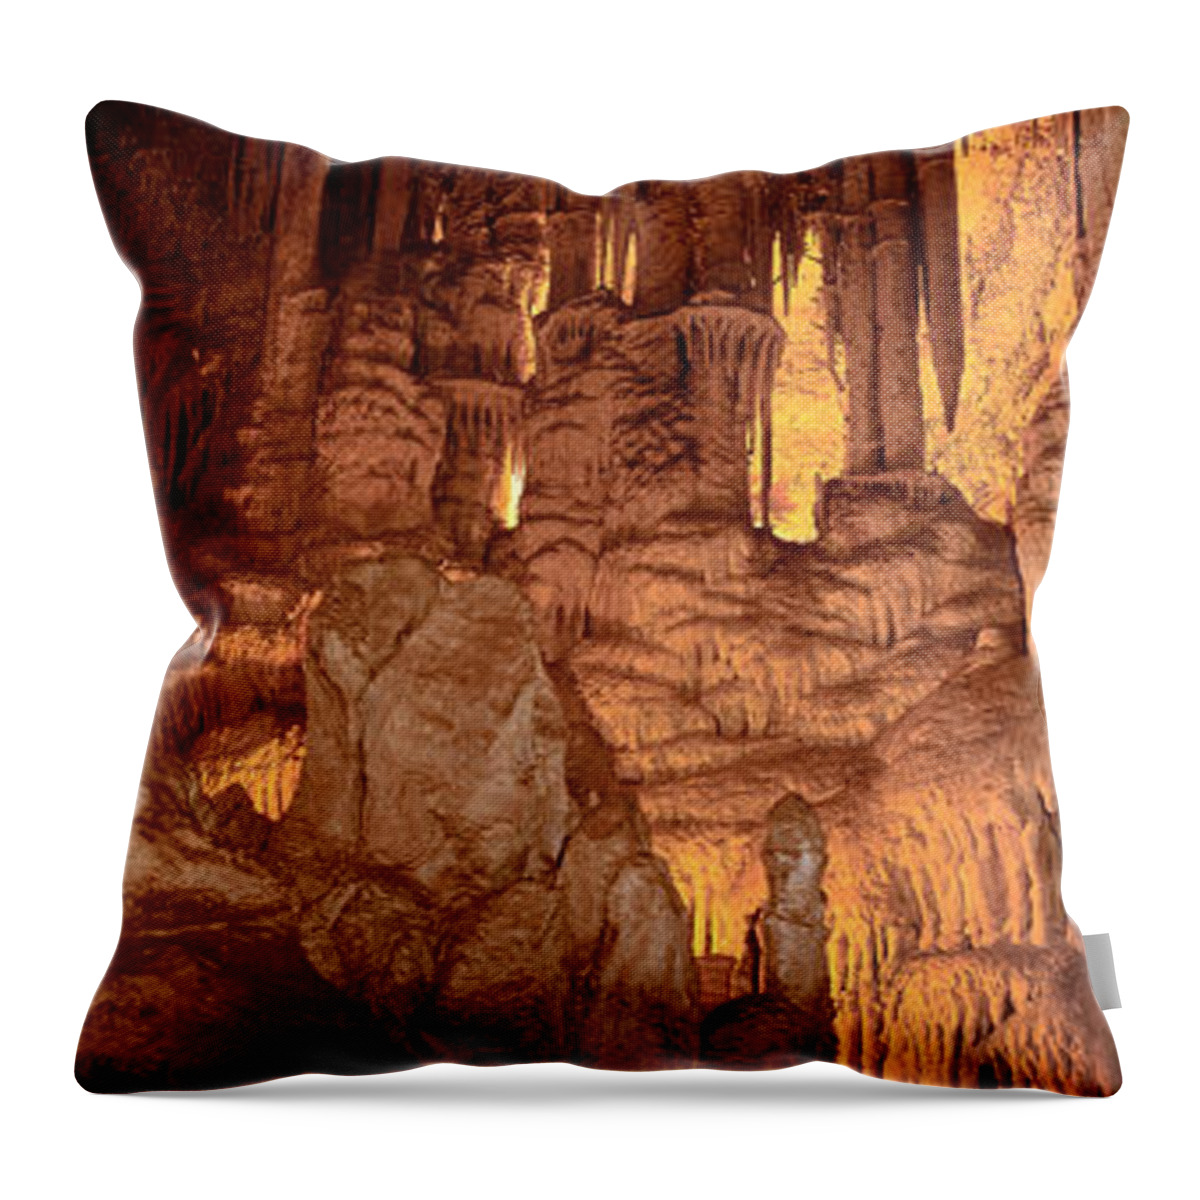 Geology Throw Pillow featuring the photograph Lehman Caves At Great Basin Np by Ron Sanford